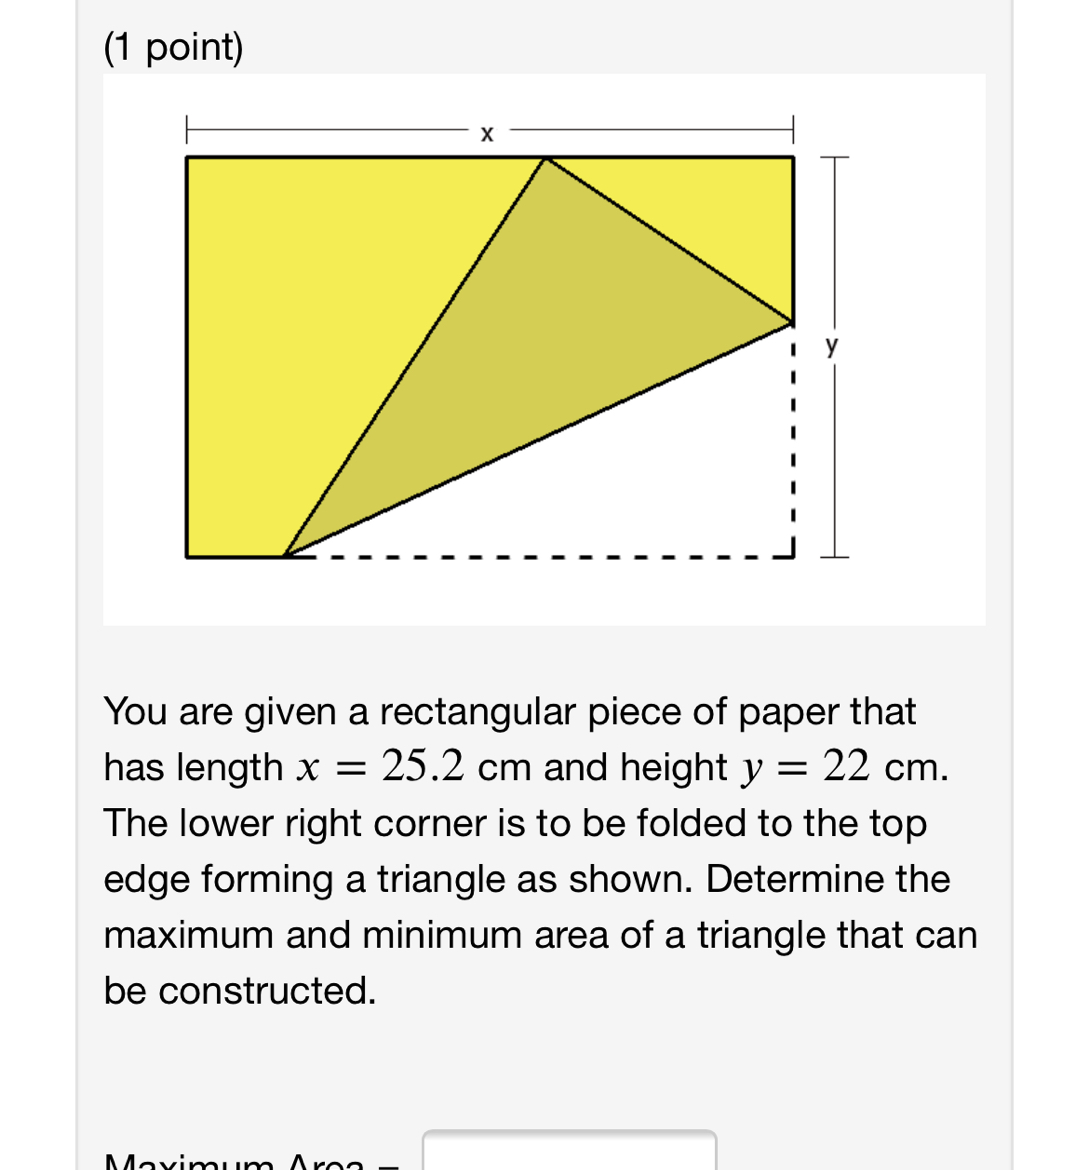 solved-1-point-you-are-given-a-rectangular-piece-of-paper-that-has